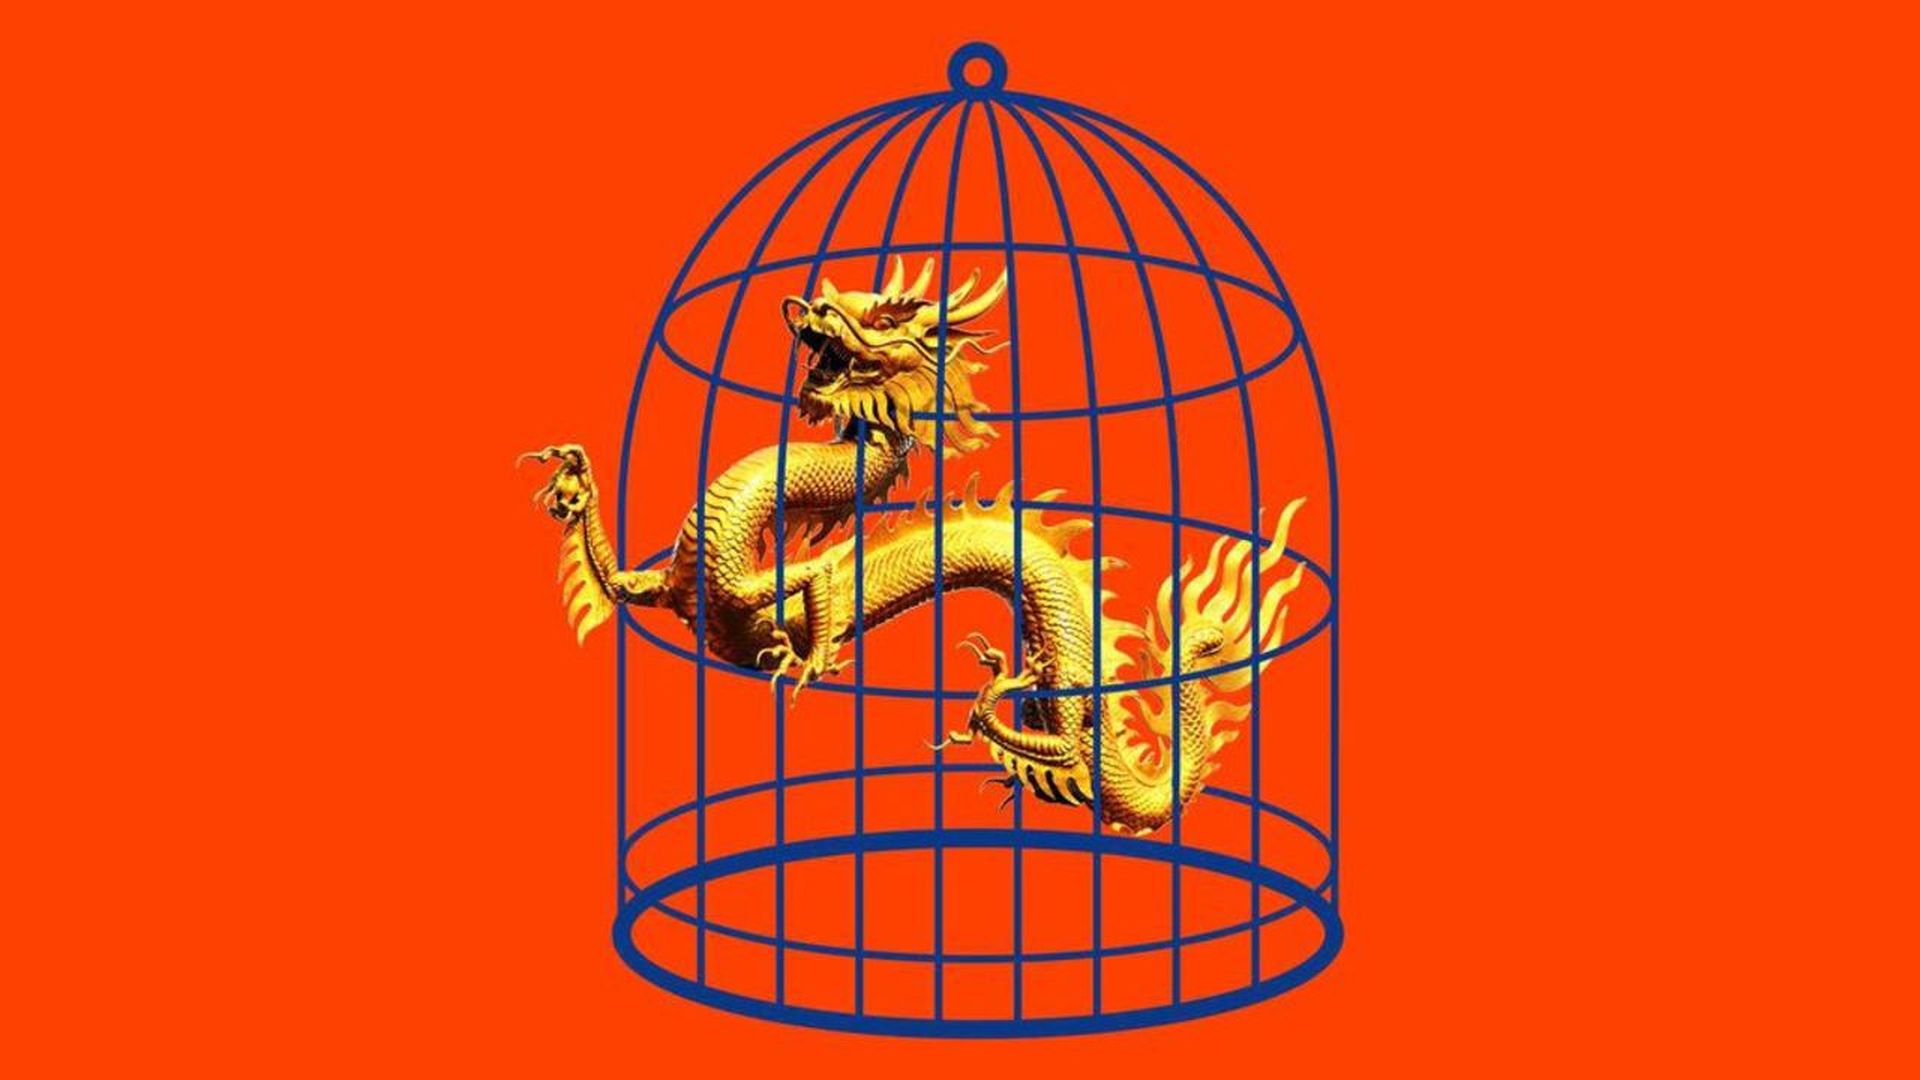 Illustration of a chinese dragon in a bird cage